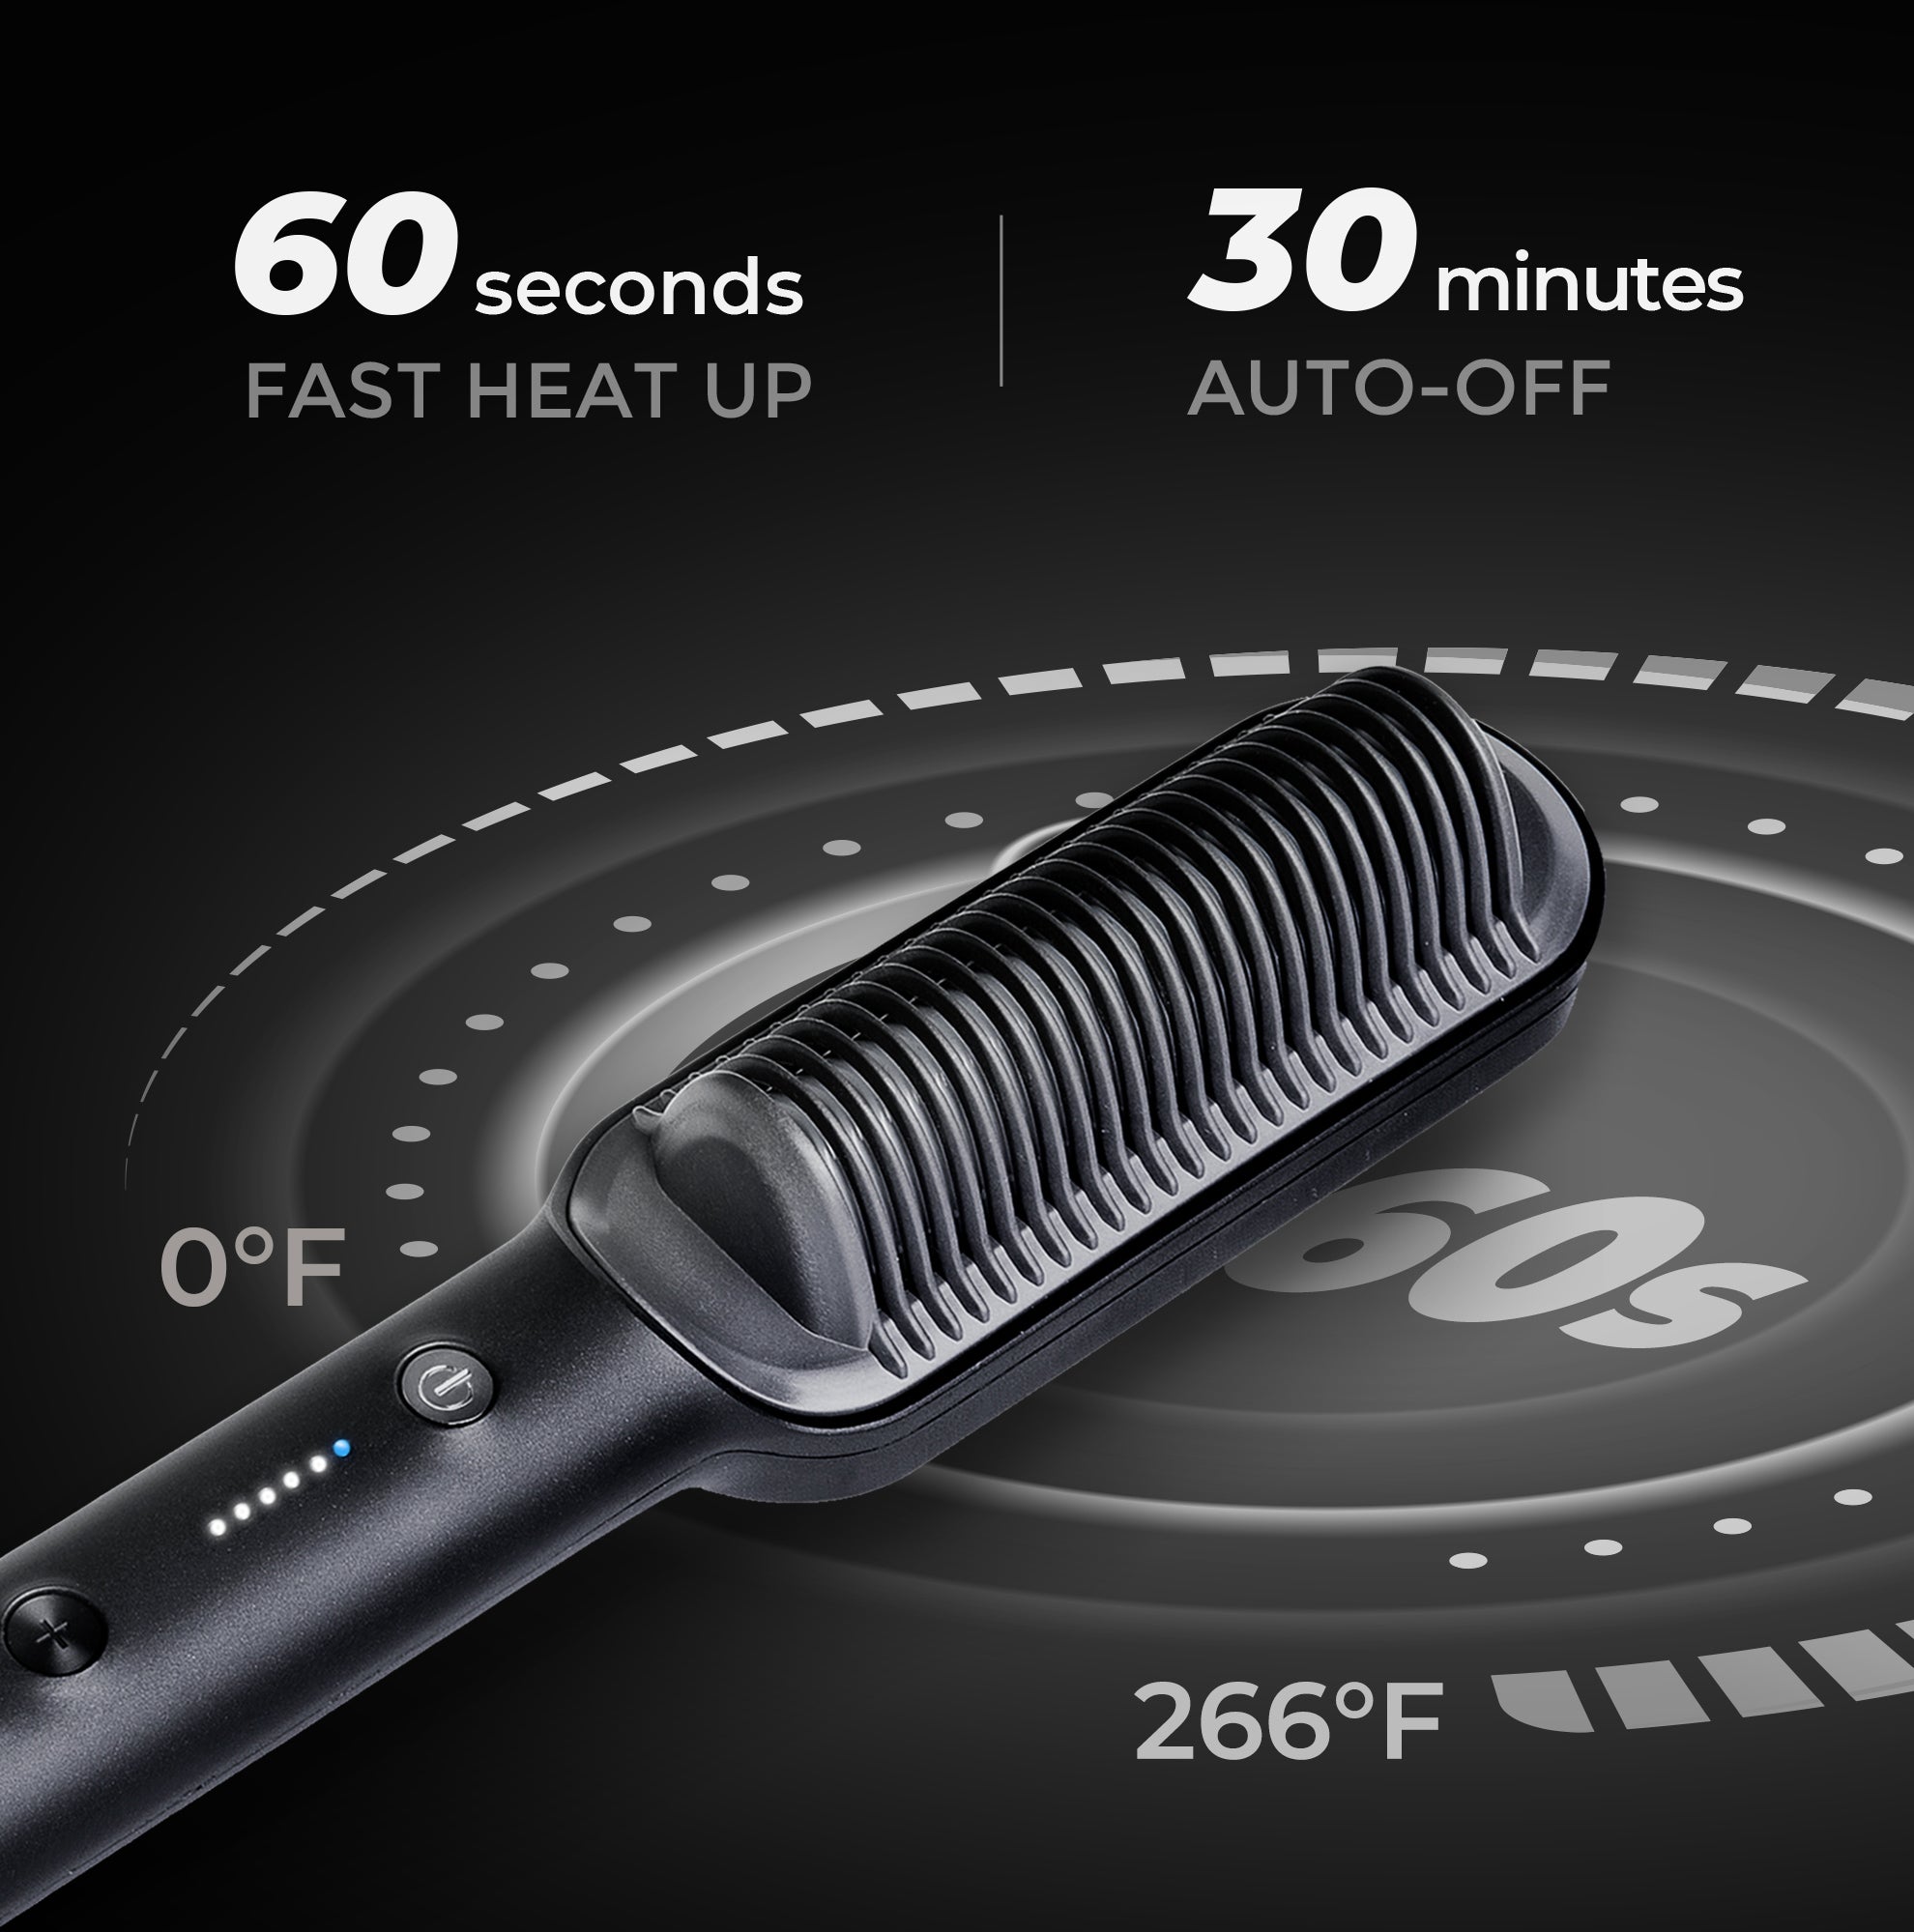 We tested the power of TYMO Ring Plus Ionic Straightening Comb and TYM